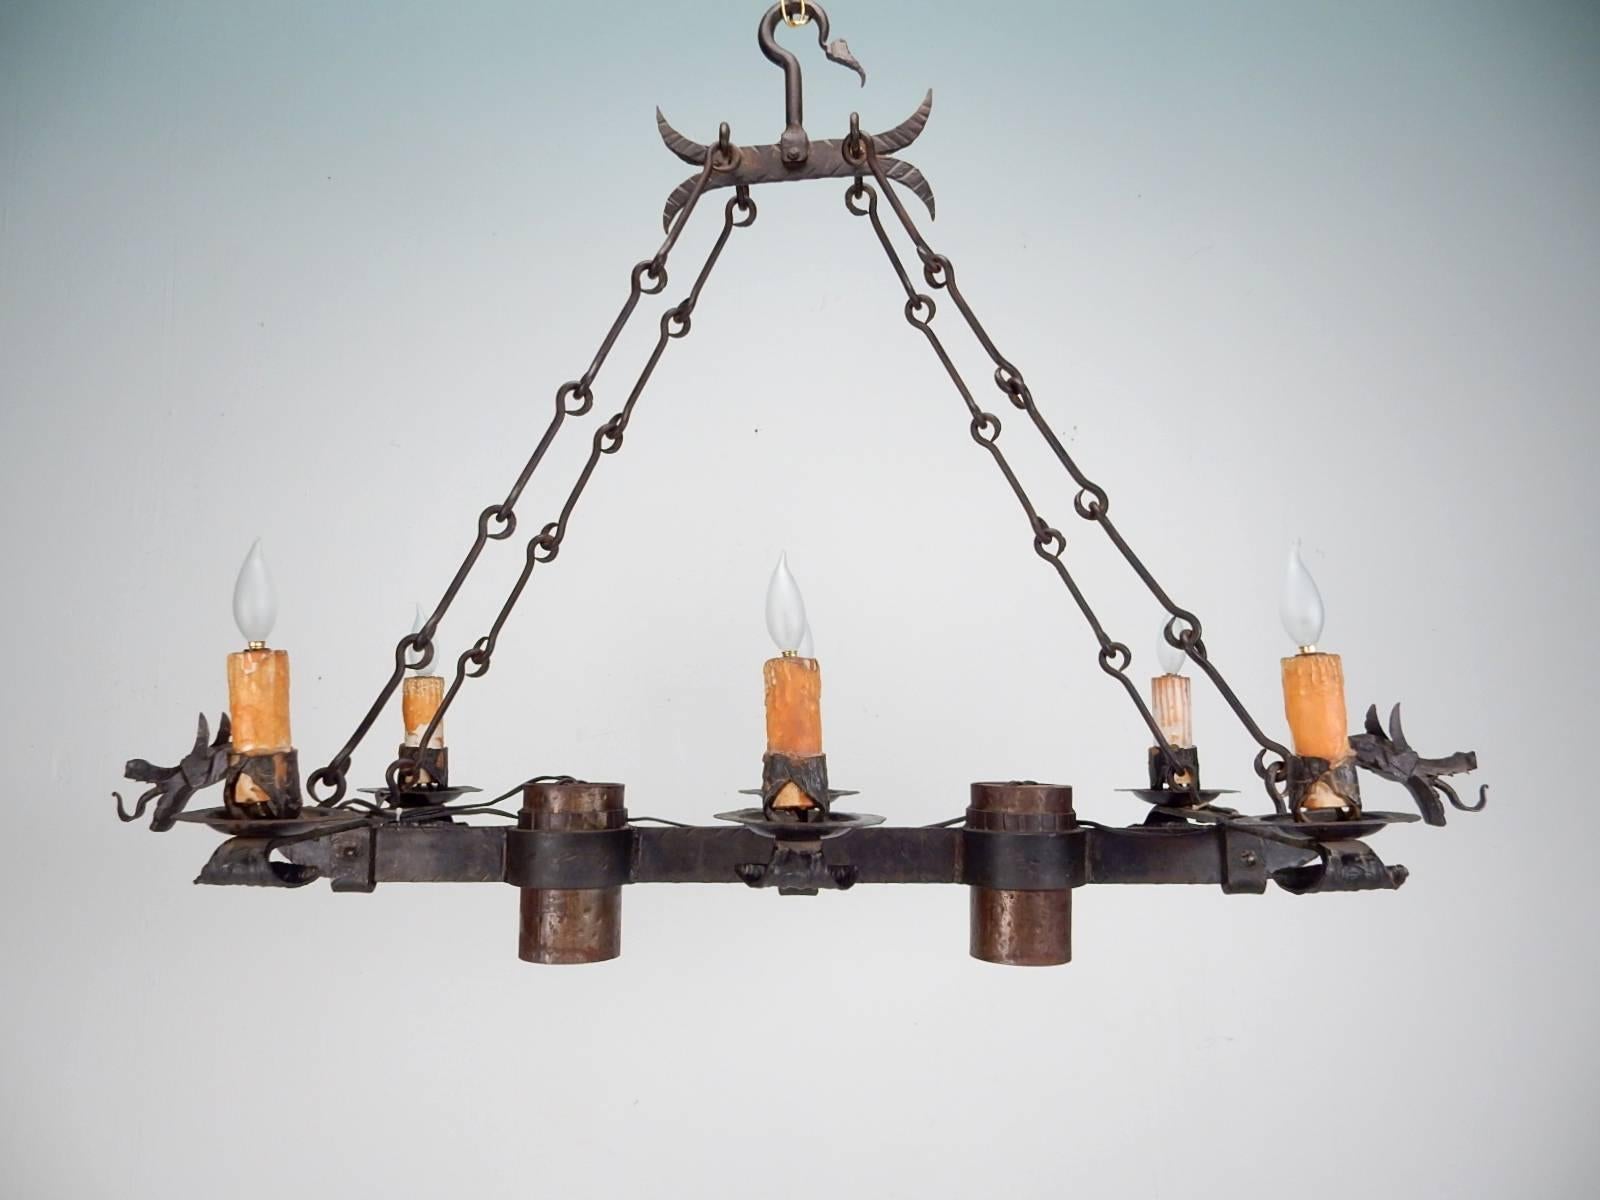 1930s Gothic wrought iron dragon Crémaillère chandelier.
Spectacular Medieval hand-forged iron dragons emanate from each end.
Over 4 feet long with four artistic link chains suspend from a large hook. 
Six candlestick bulbs on realistic wax